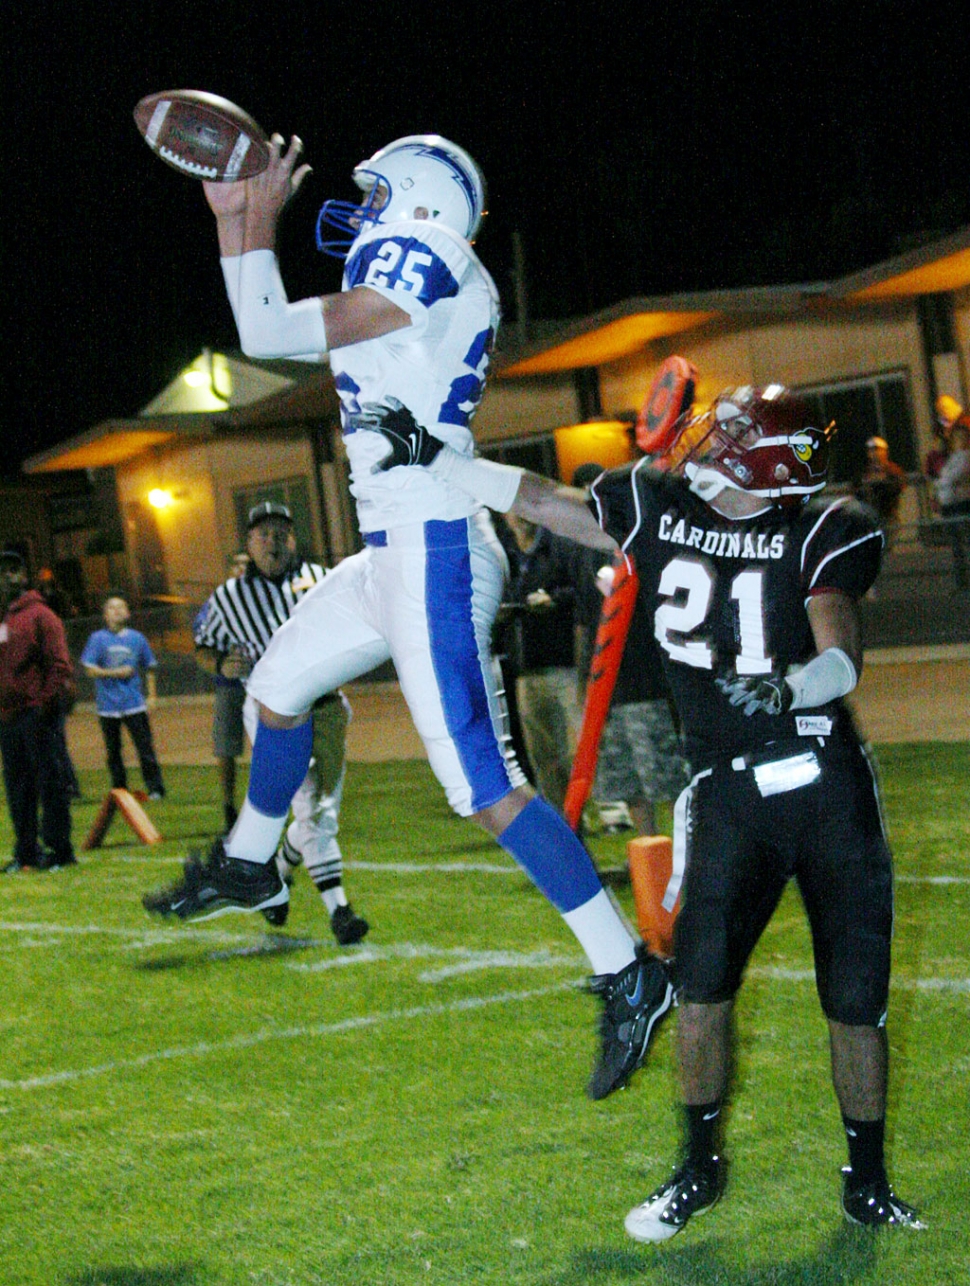 Chris DeLaPaz #25 caught two touchdown’s Friday night including the game winning touchdown in the last 20 seconds of the game.